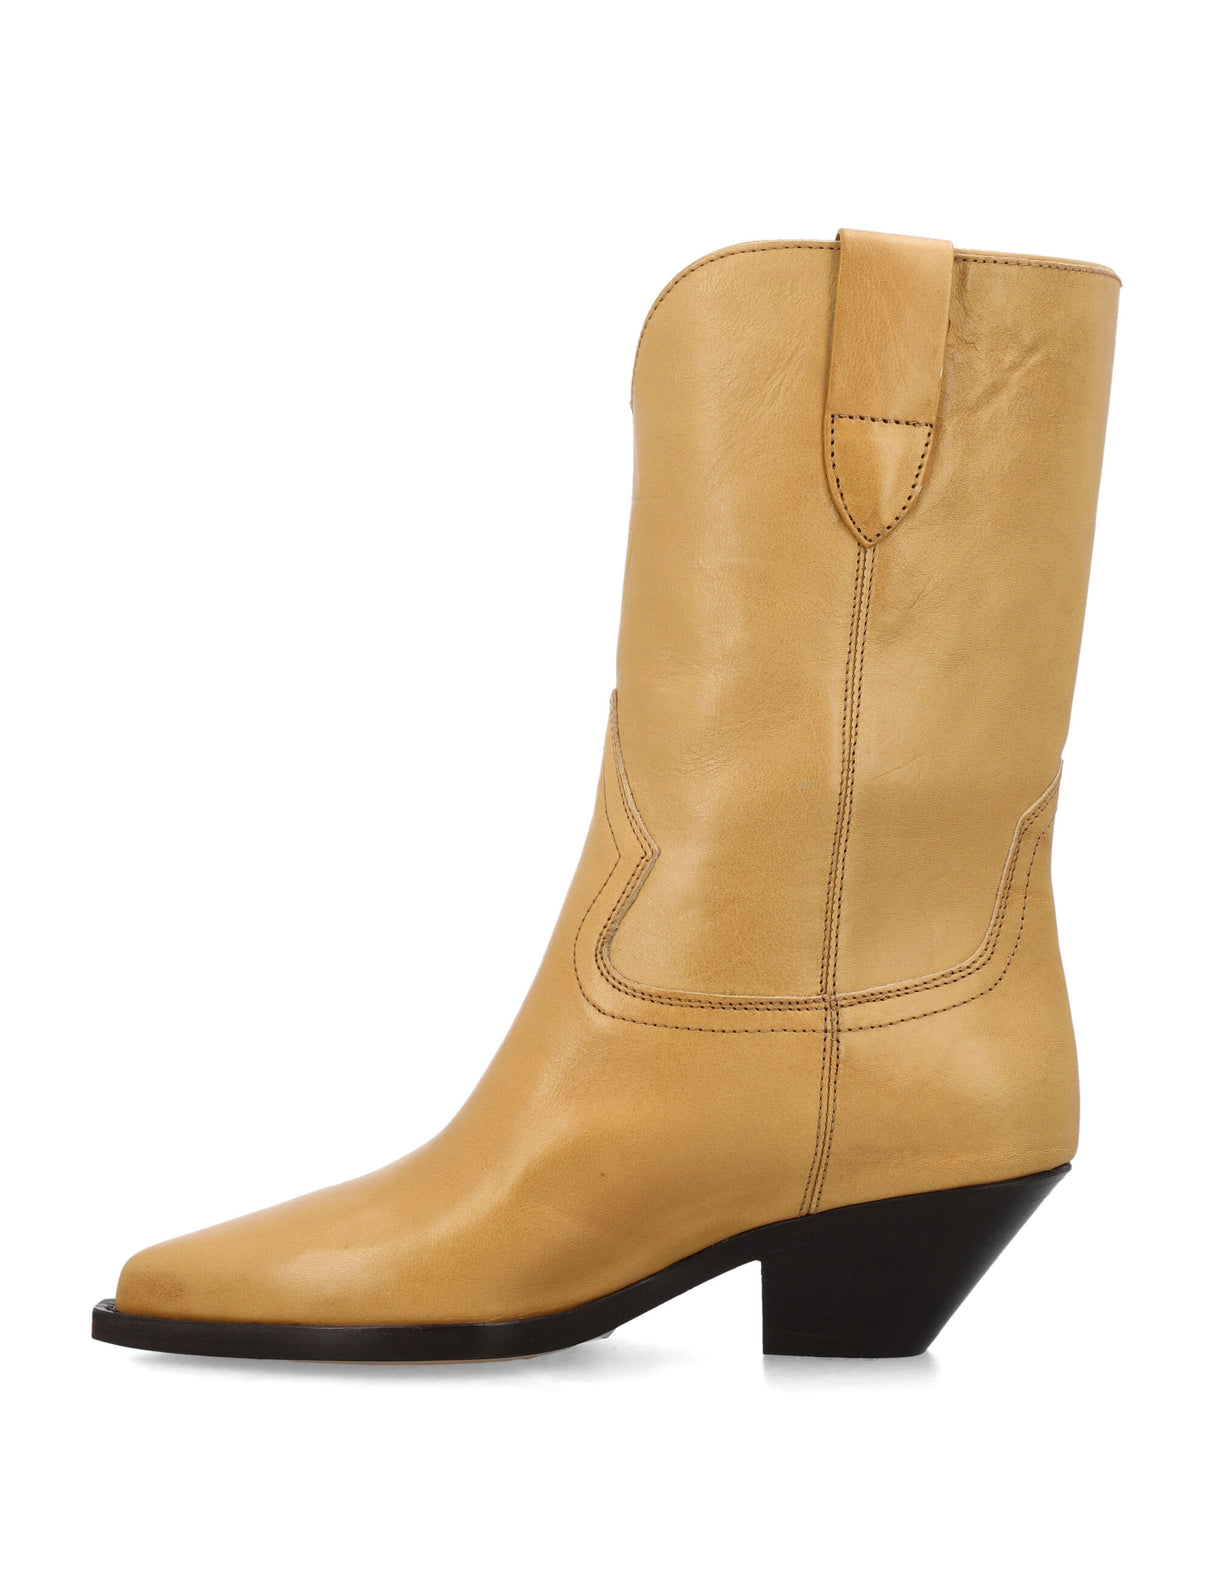 ISABEL MARANT Natural Leather Pointed Toe Cowboy Boots for Women